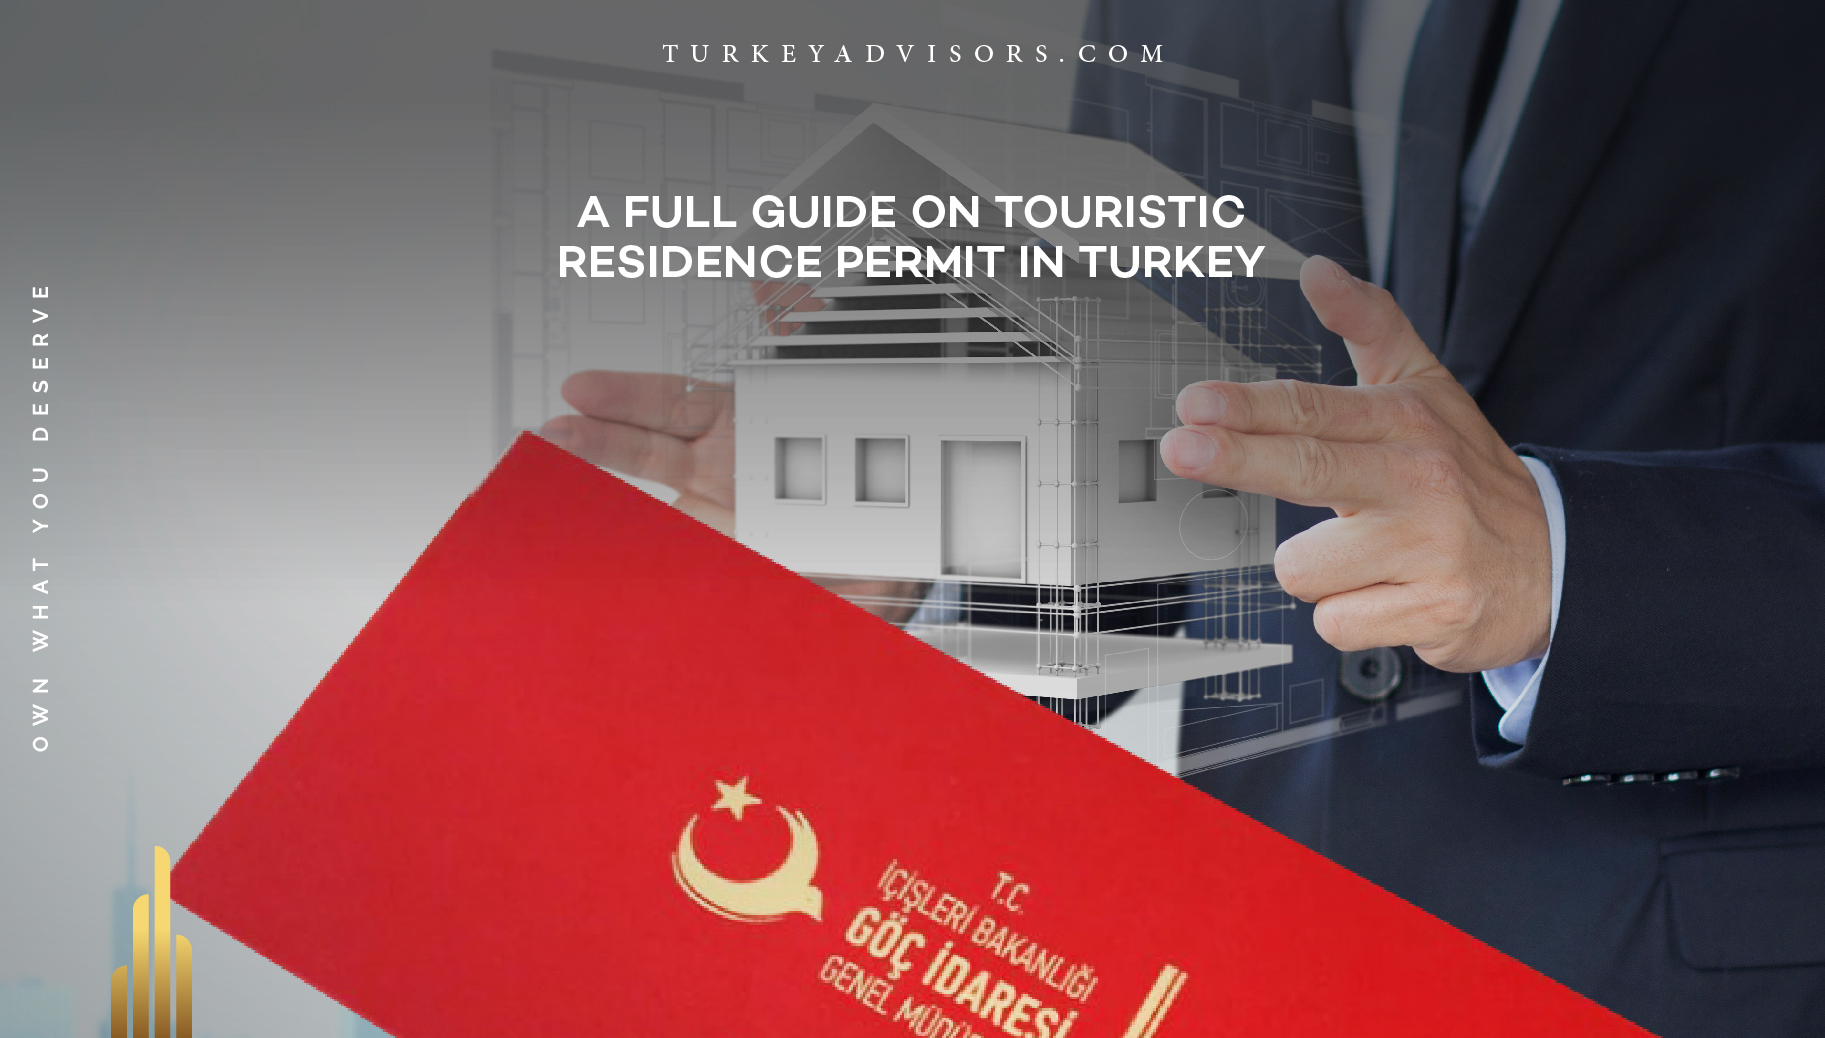 A complete guide on touristic residence permit in Turkey